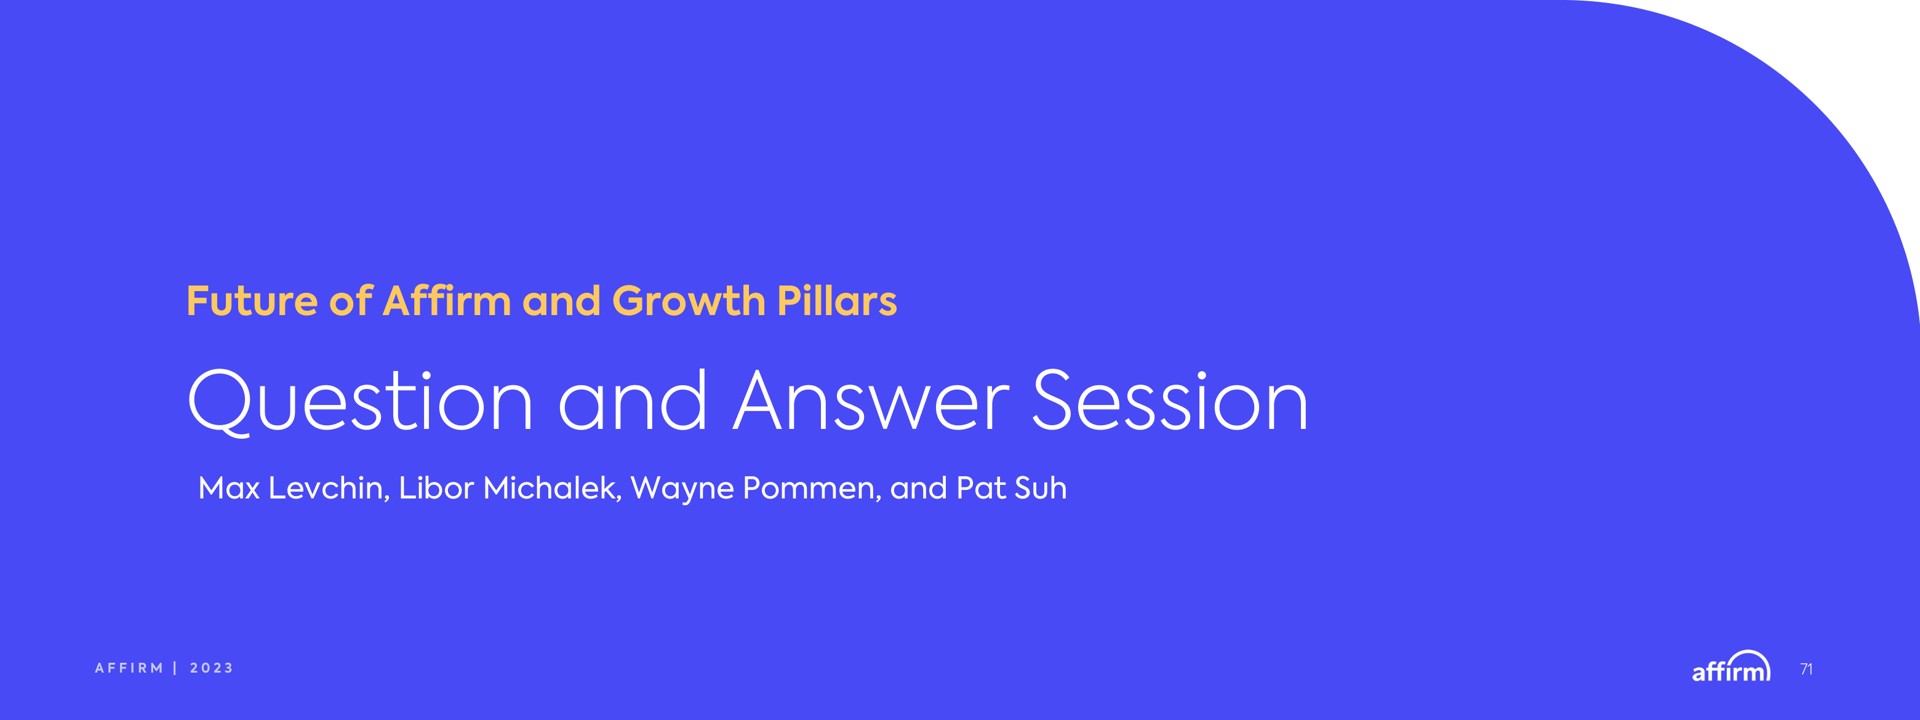 future of affirm and growth pillars question and answer session | Affirm